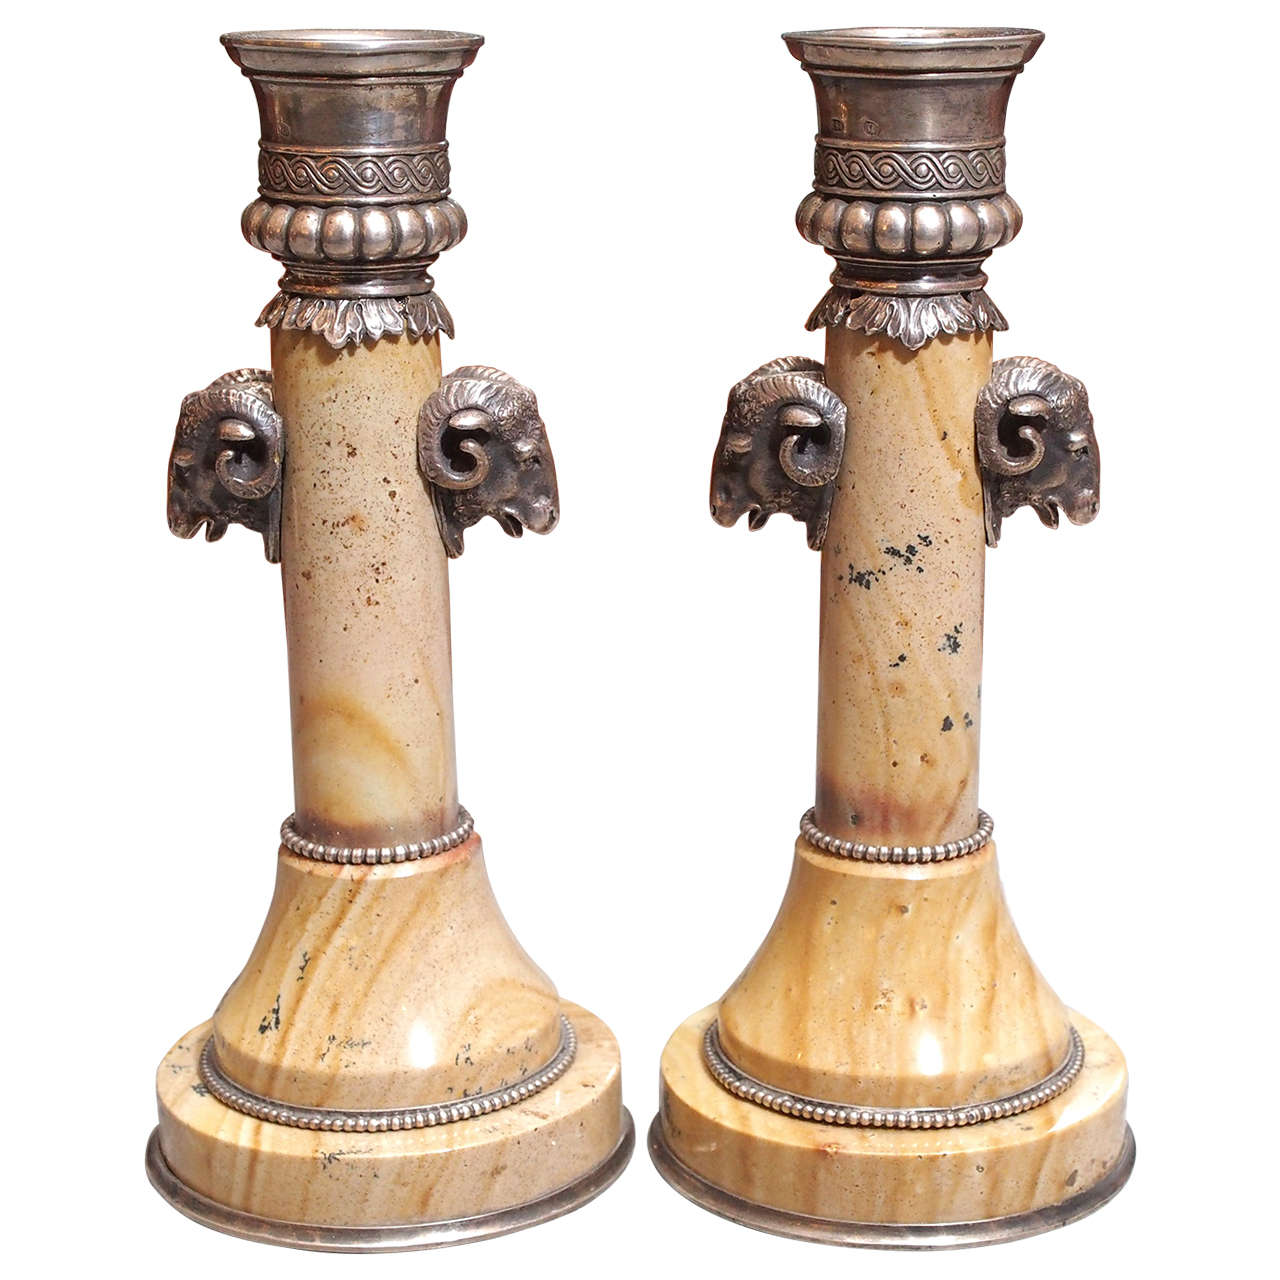 Pair of Russian Hardstone and Silver Candlesticks